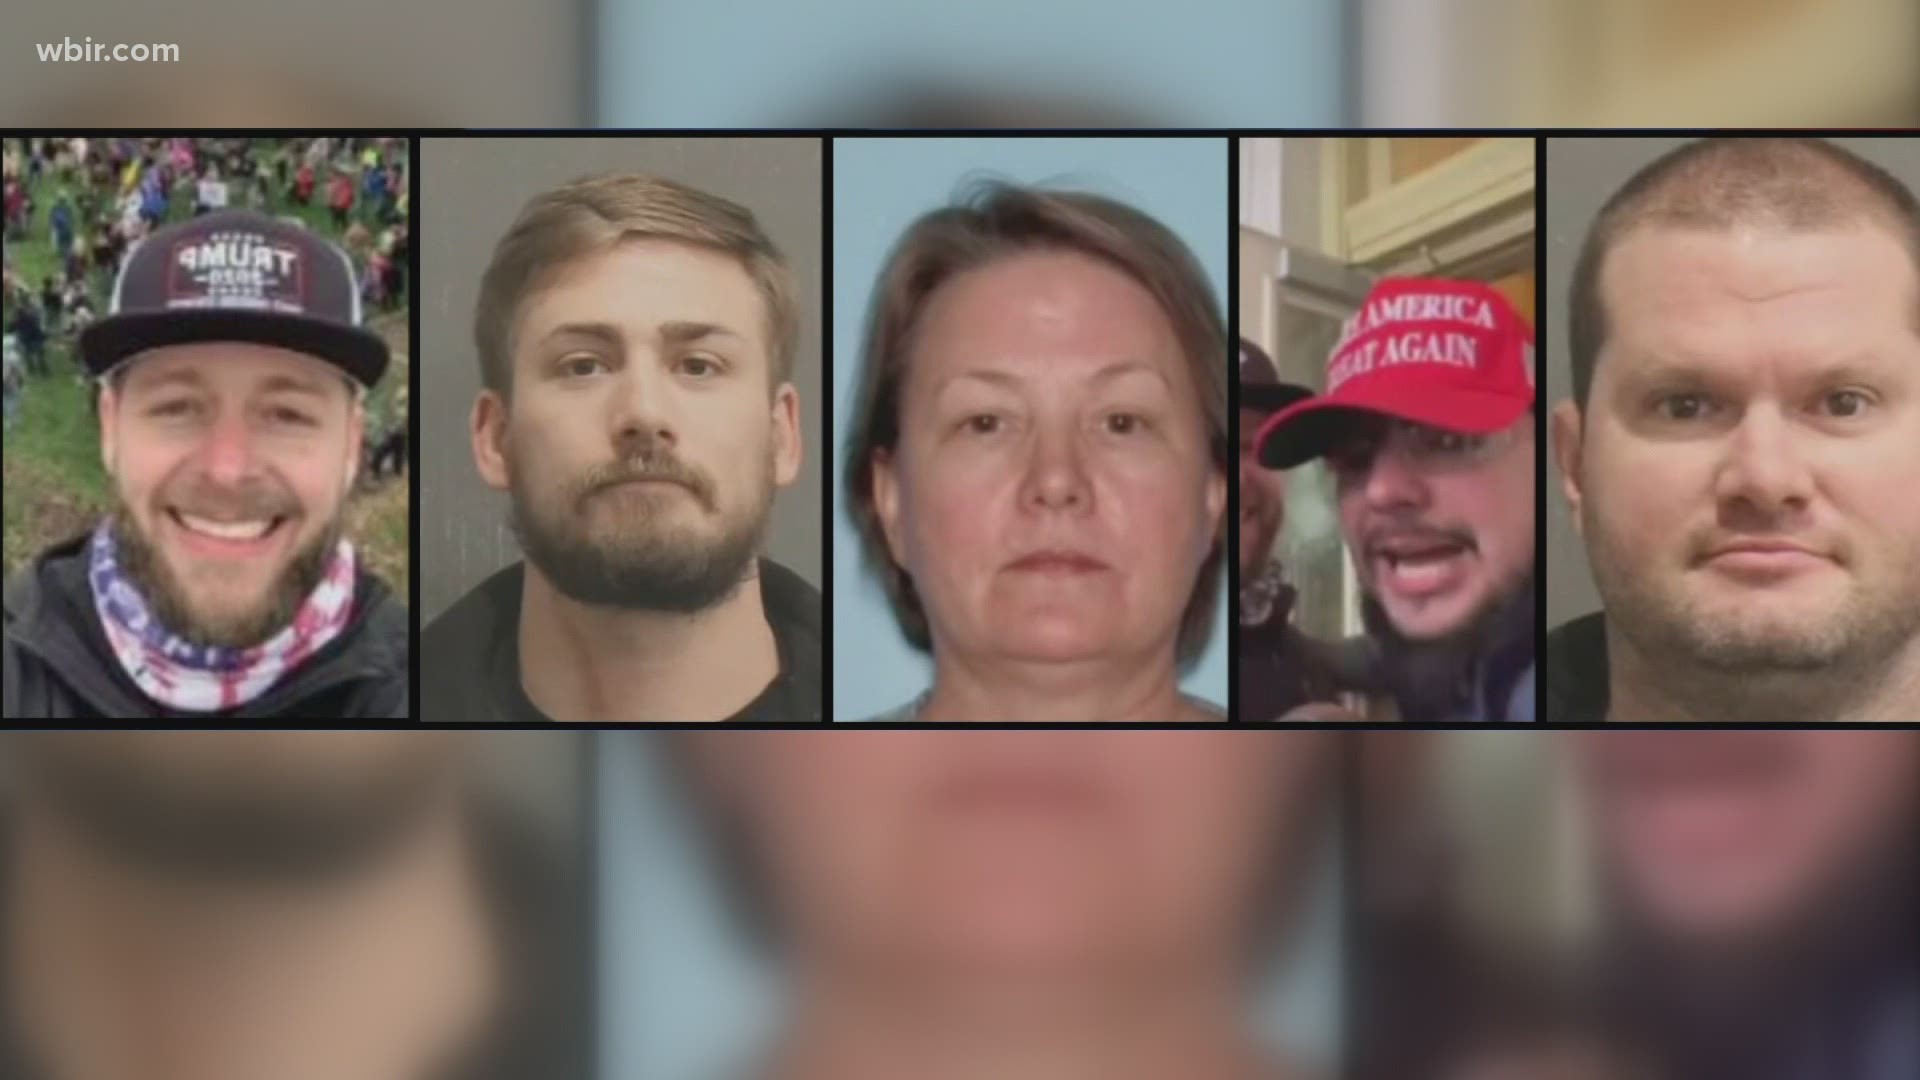 The five arrested are Matthew Bledsoe of Memphis, Eric Munchel, known as the Zip Tie Guy, and his mom Lisa Eisenhart, Jack Griffith of Gallatin, and Blake Reed.